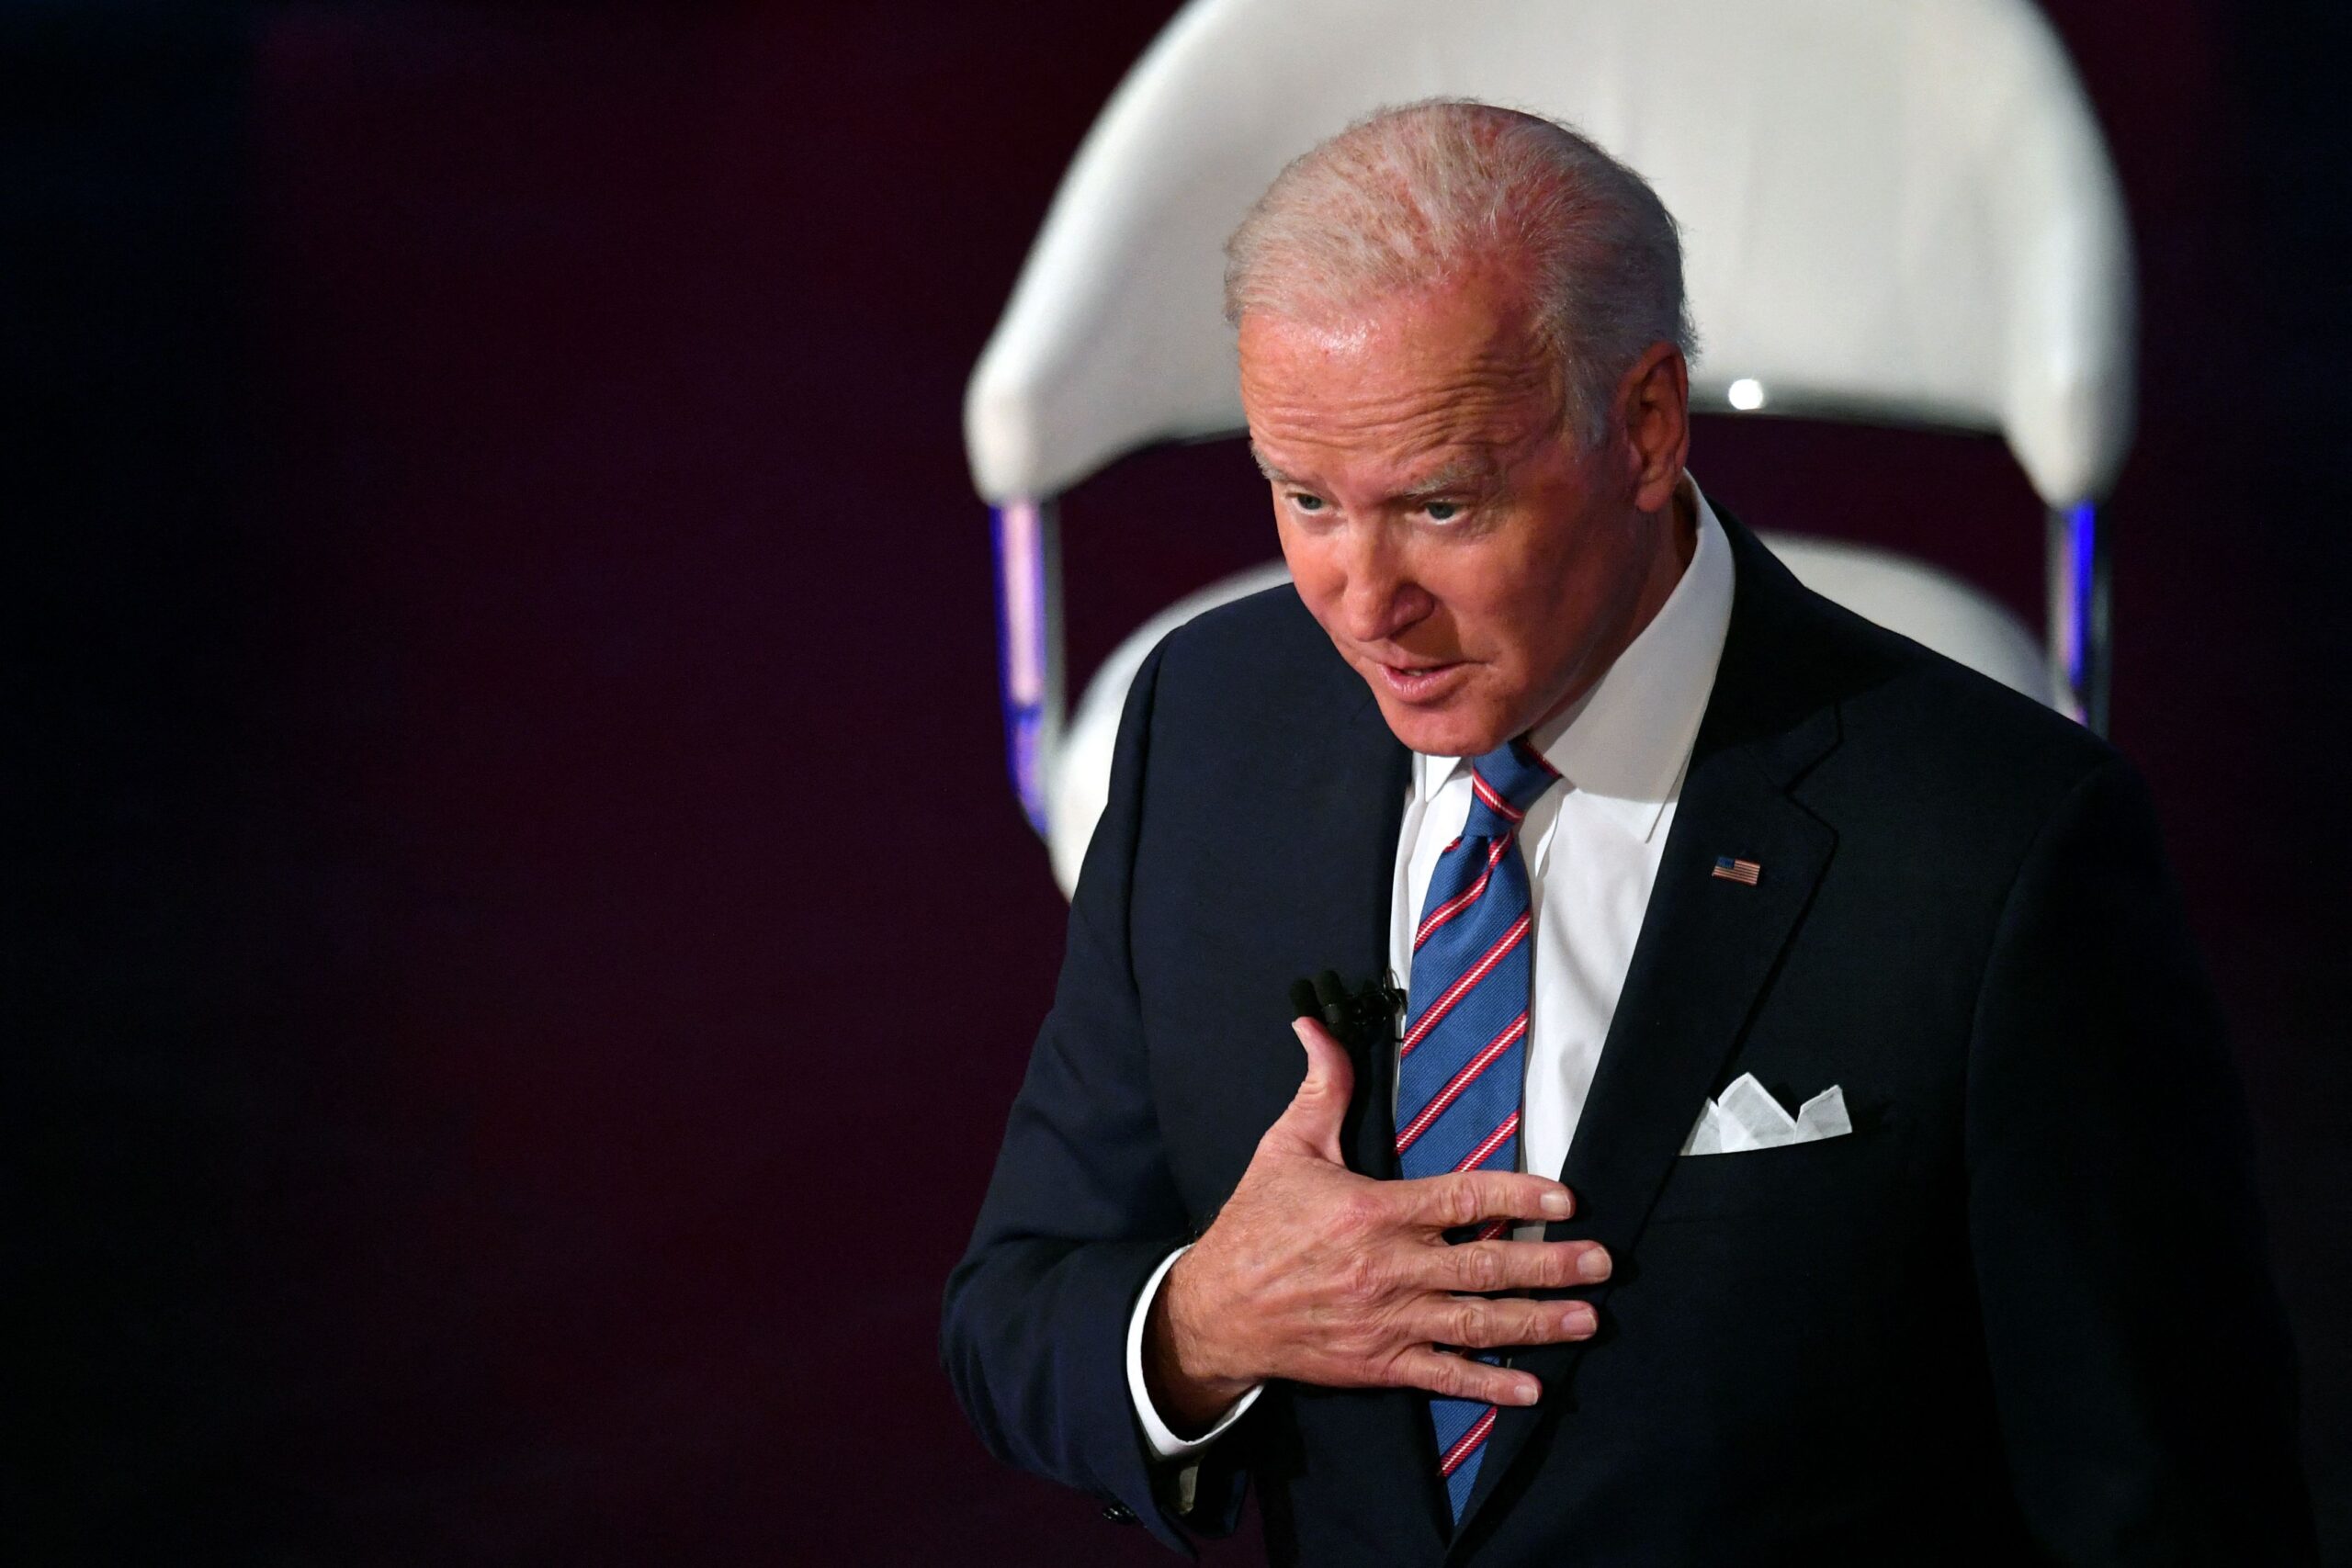 Card Thumbnail - Everything Biden Said About Higher Ed in CNN Town Hall